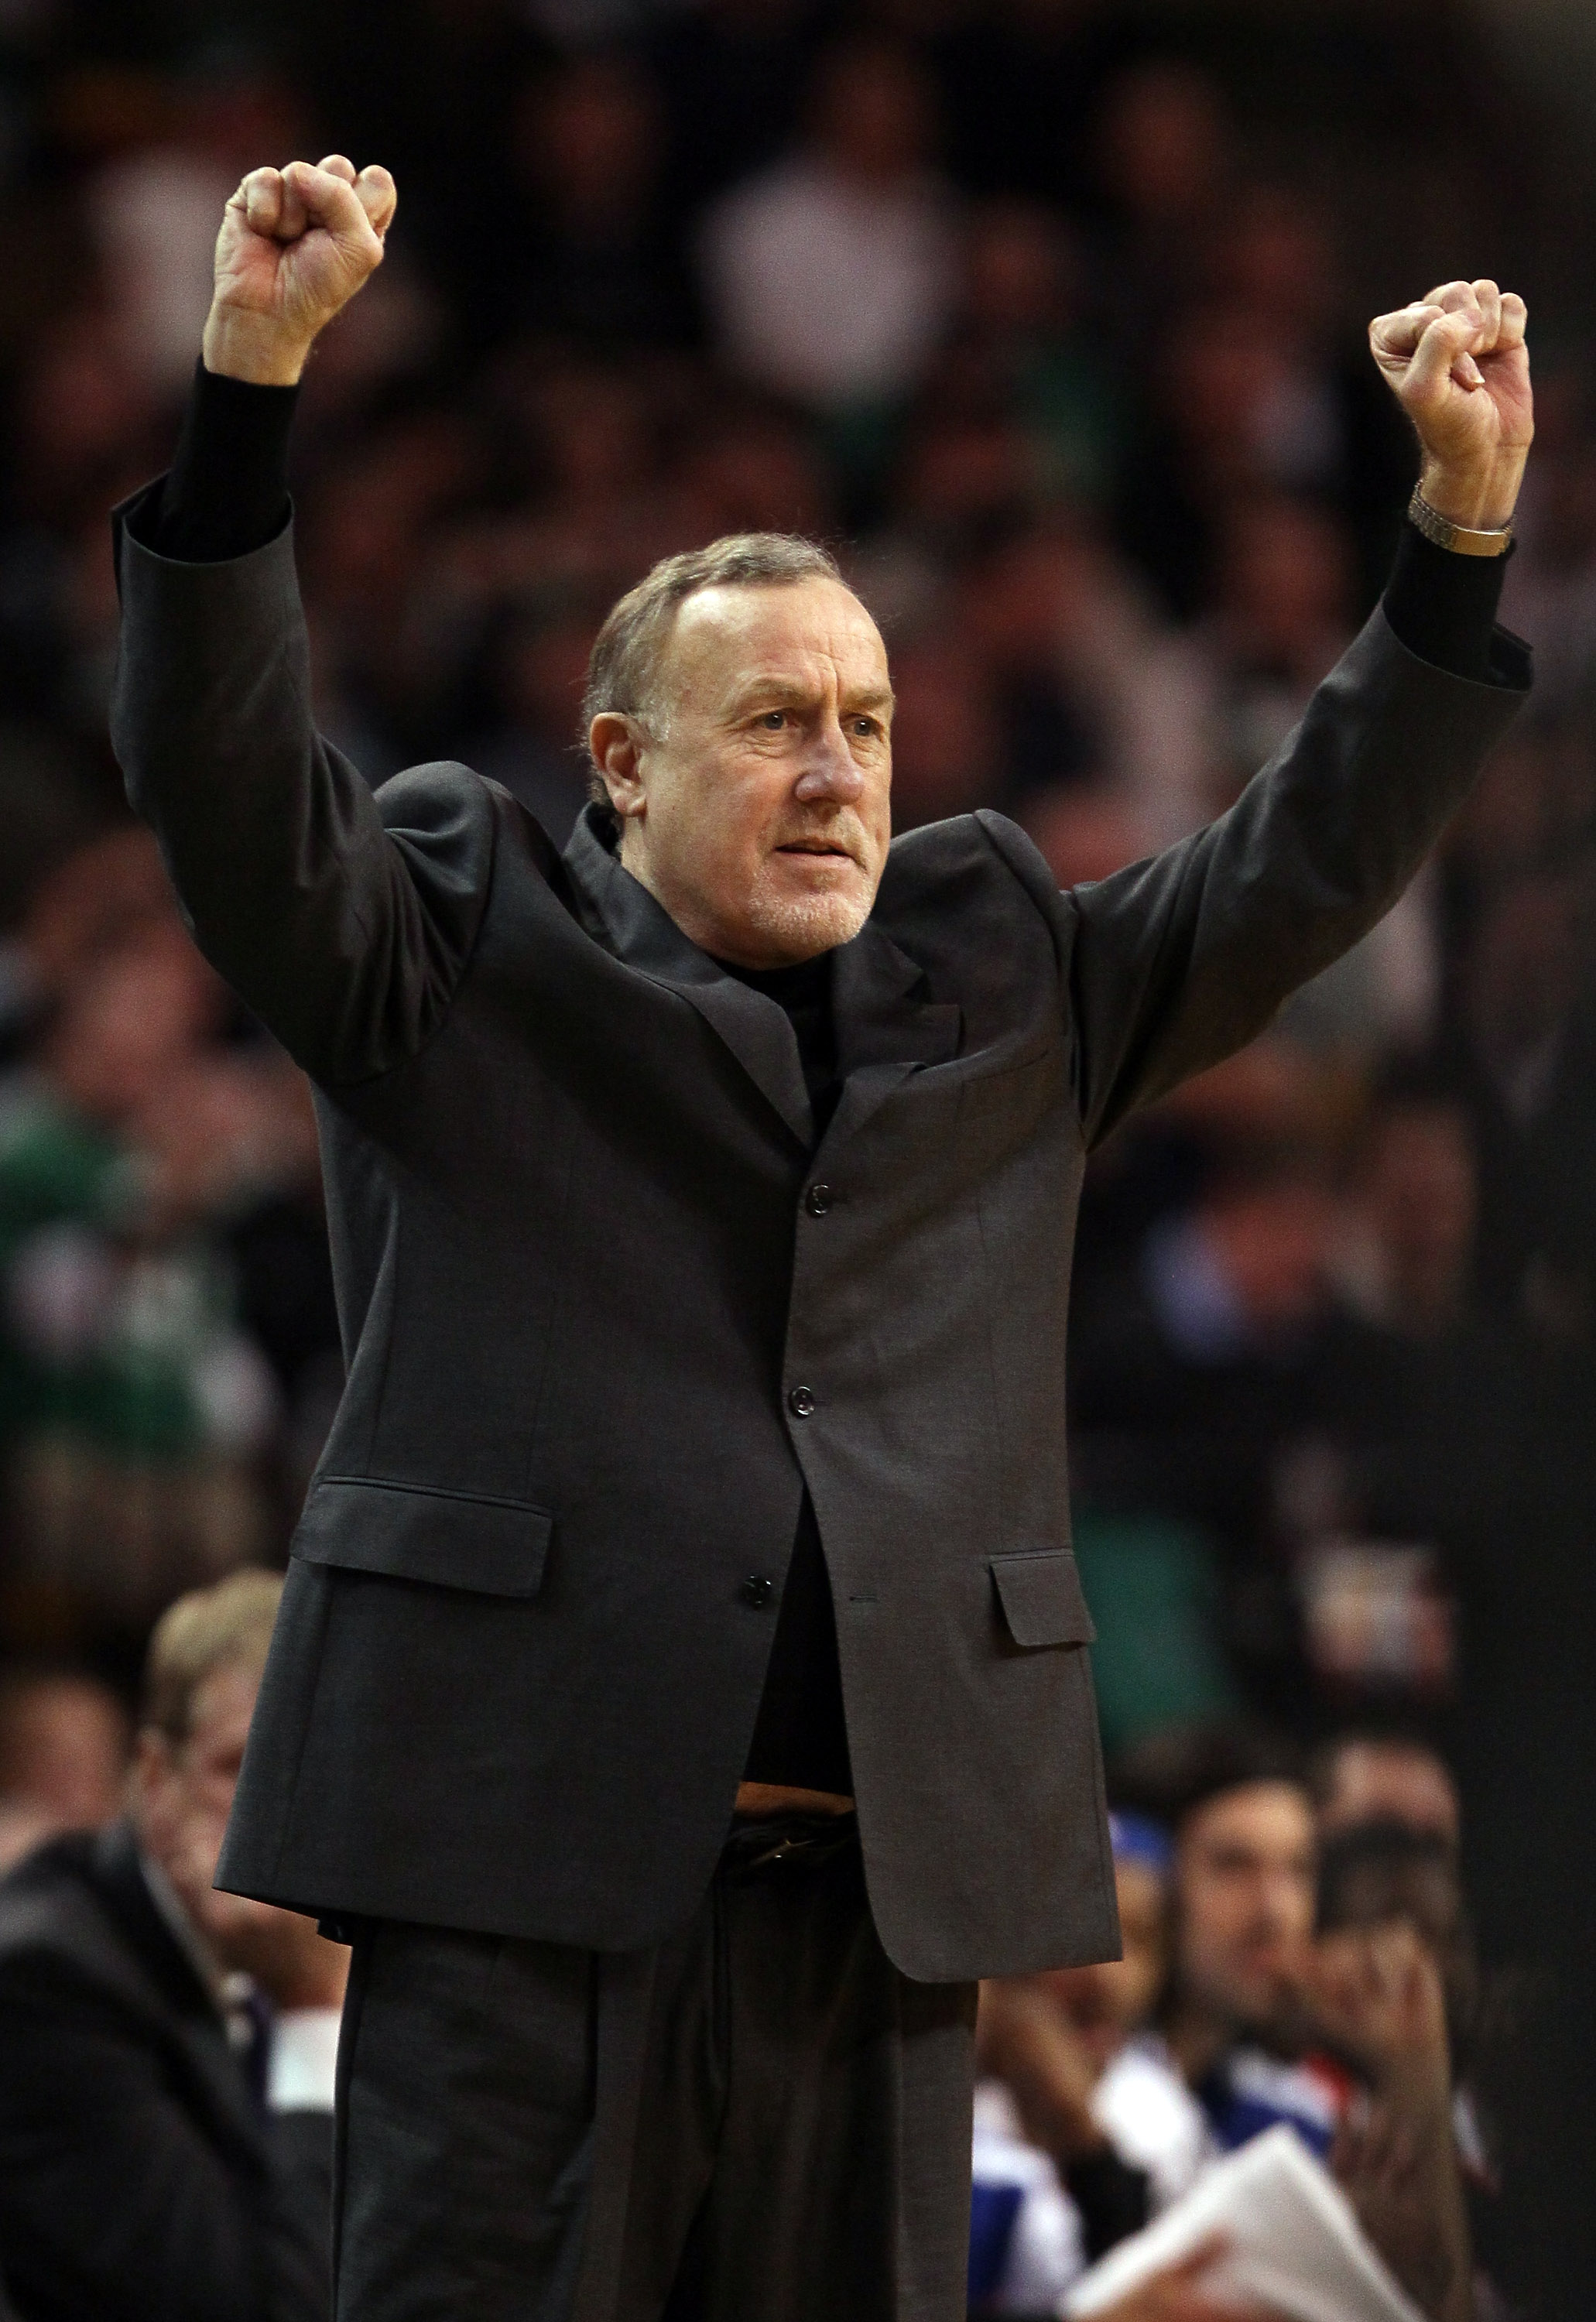 BOSTON, MA - JANUARY 10:  Head coach Rick Adelman of the Houston Rockets signals a play in the first half against the Boston Celtics on January 10, 2011 at the TD Garden in Boston, Massachusetts.  NOTE TO USER: User expressly acknowledges and agrees that,